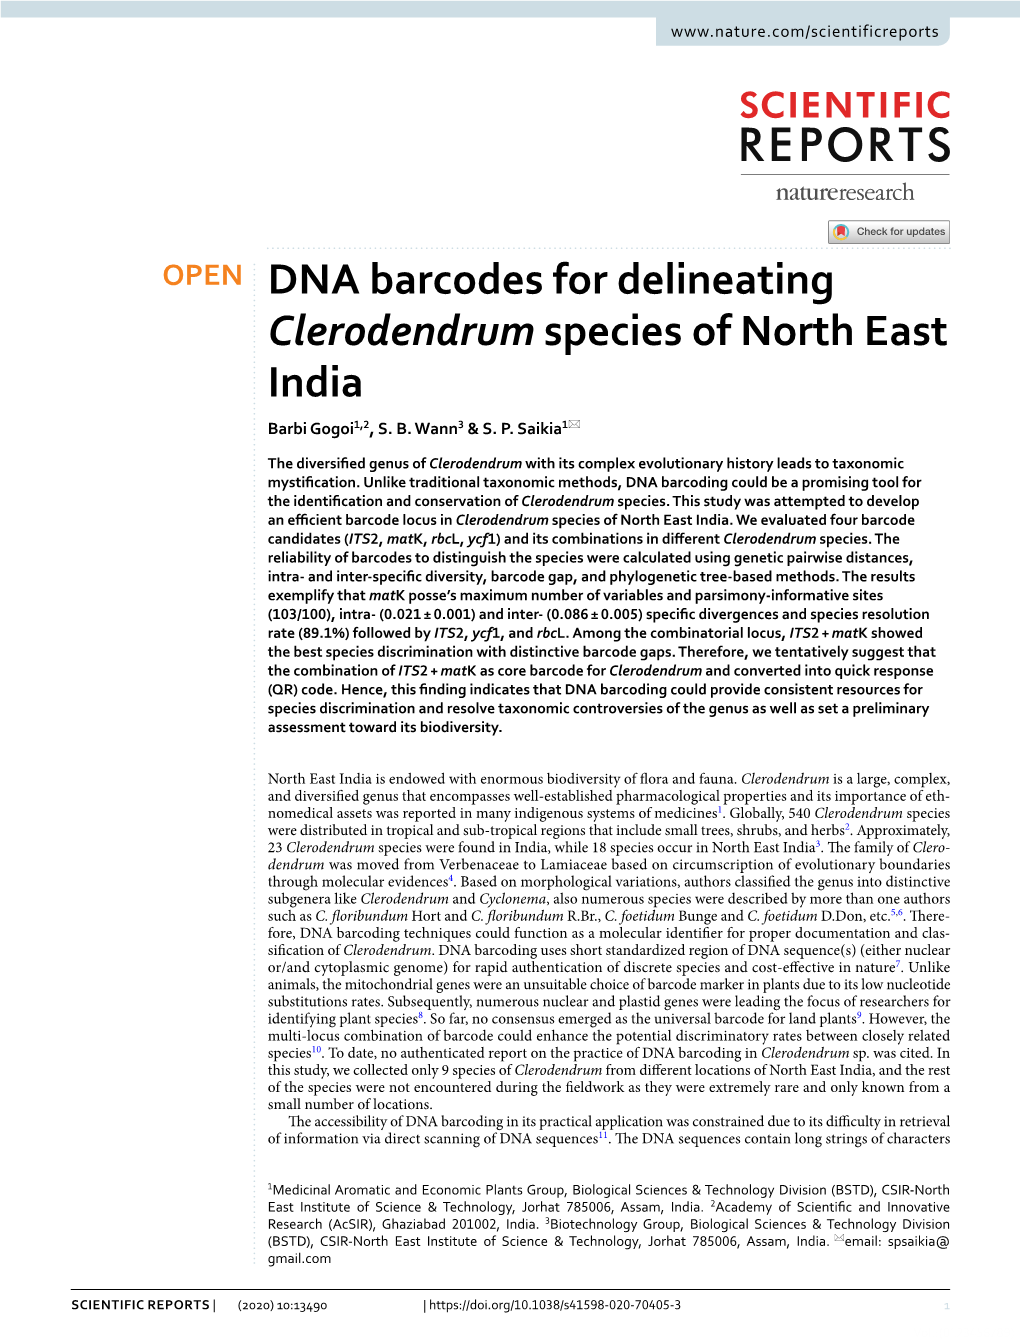 DNA Barcodes for Delineating Clerodendrum Species of North East India Barbi Gogoi1,2, S